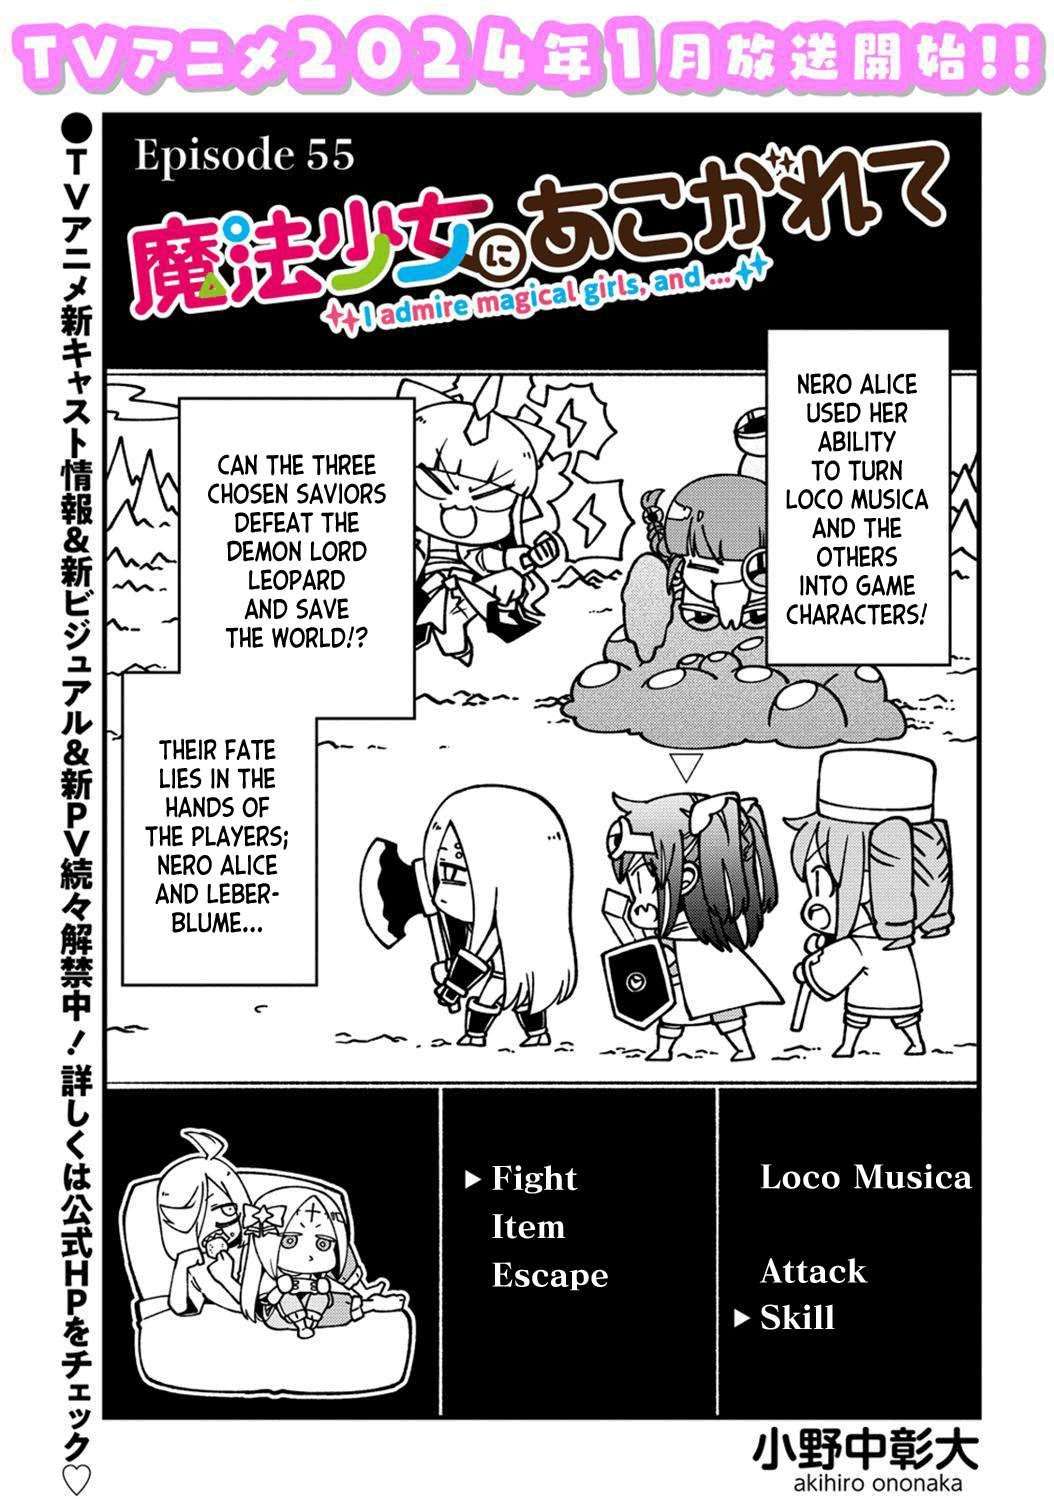 Gushing over Magical Girls - chapter 55 - #3